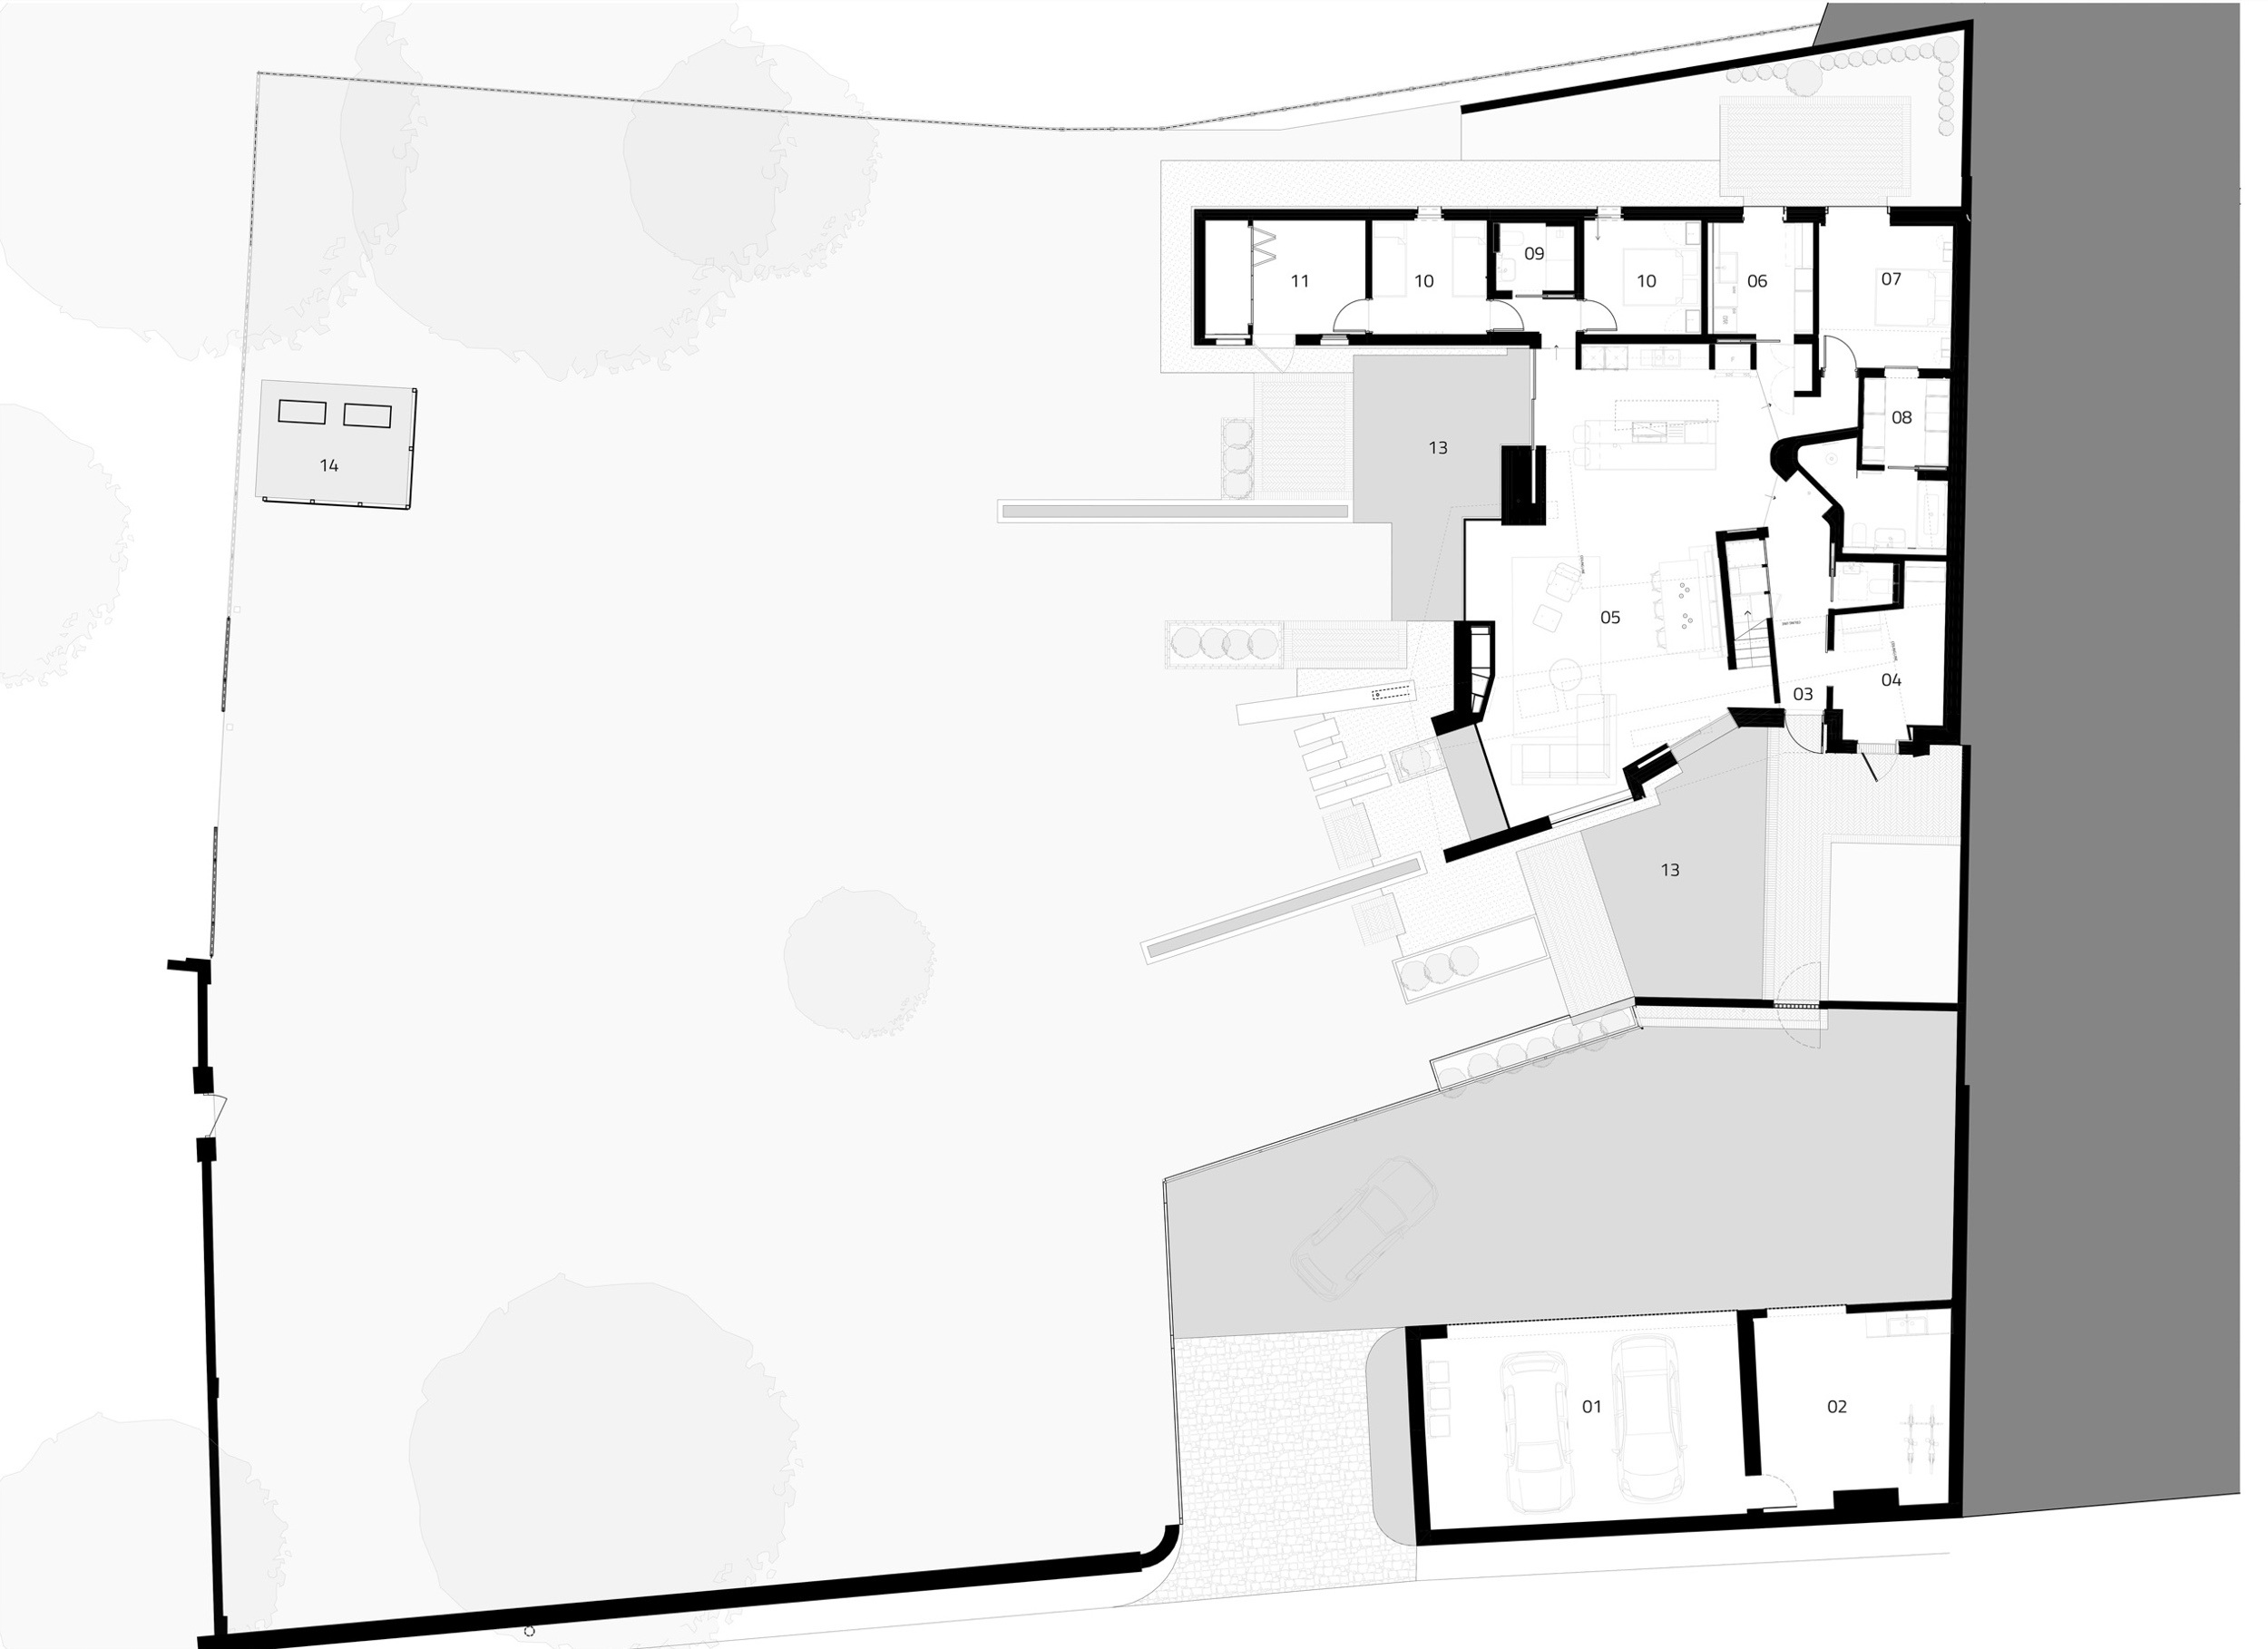 architecture ground floor plan drawing of house | cdc studio cambridge architects